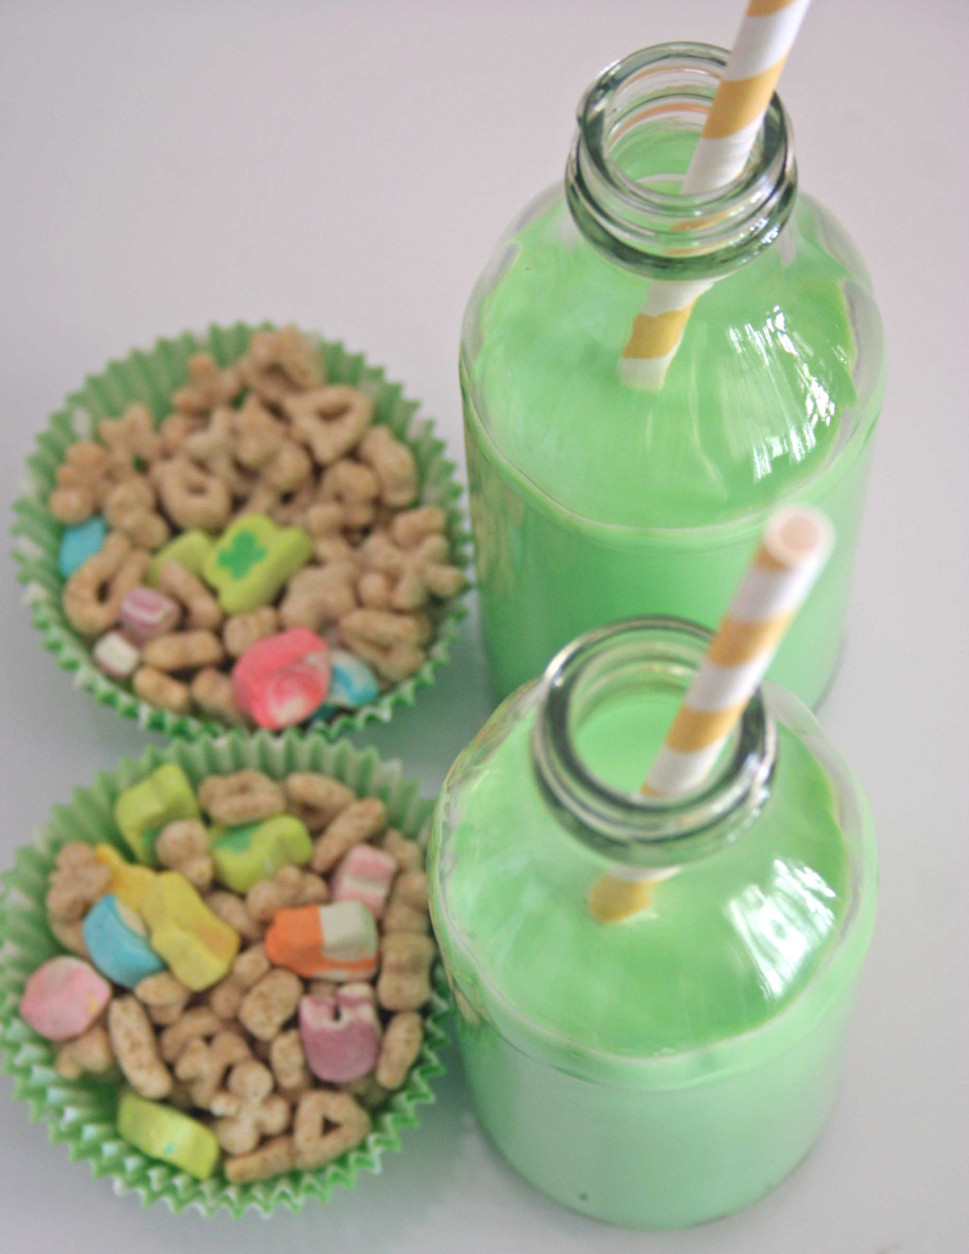 If you're looking for an extremely simple way to kick off the holiday with your kids (or even if you're just a child at heart), try blogger <a href="http://www.thoughtfullysimple.com/a-lucky-breakfast/">Thoughtfully Simple</a>'s idea for Lucky Charms cereal with green milk. (Courtesy Thoughtfully Simple)